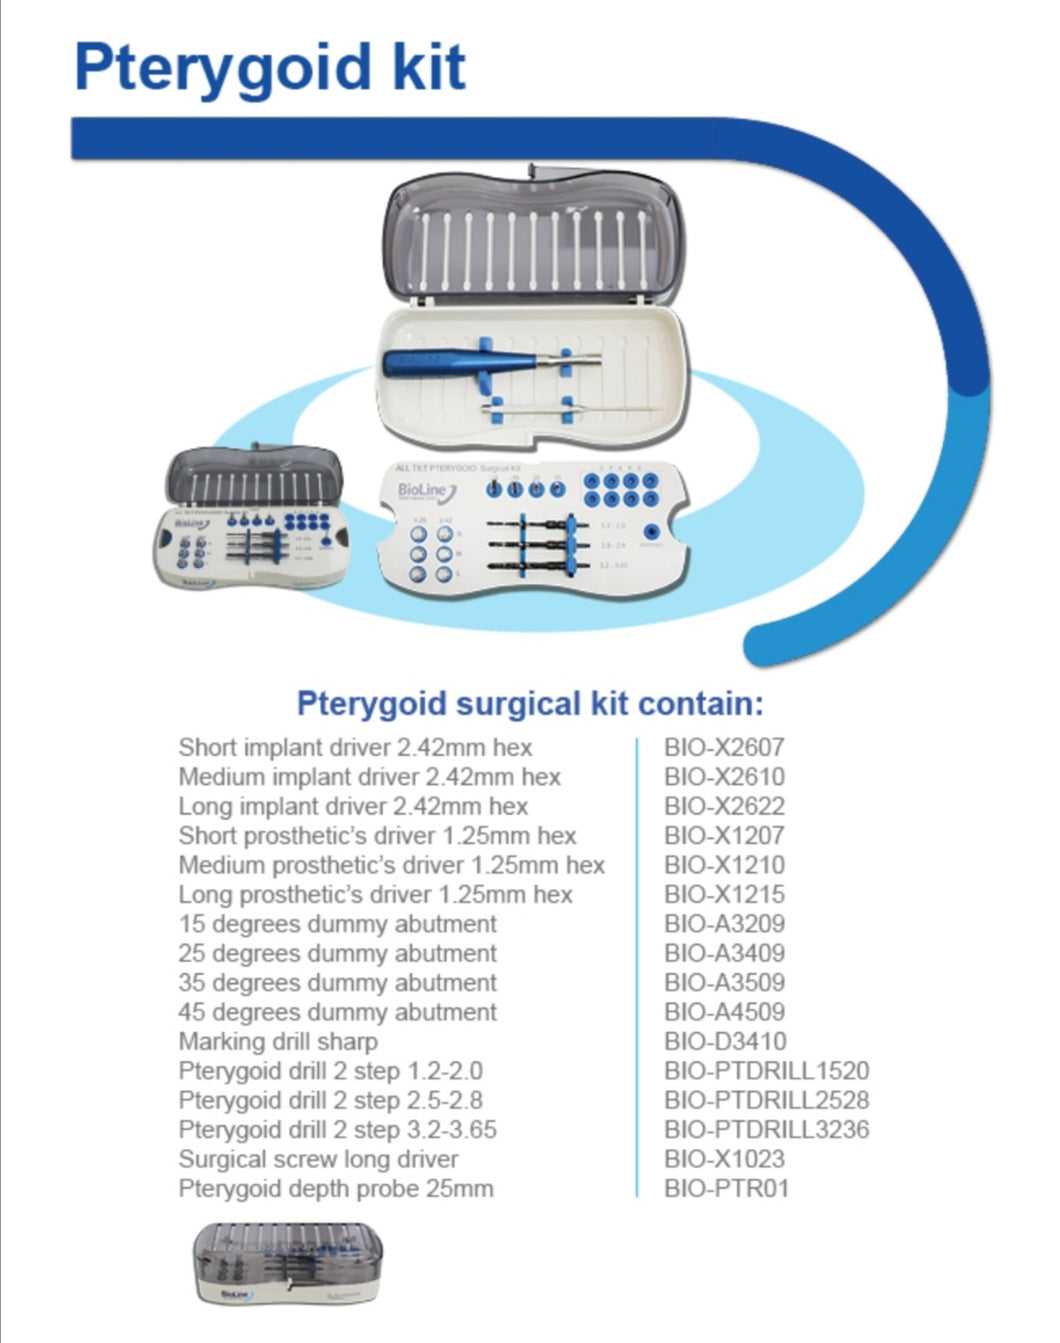 Pterygoid Surgical Kit